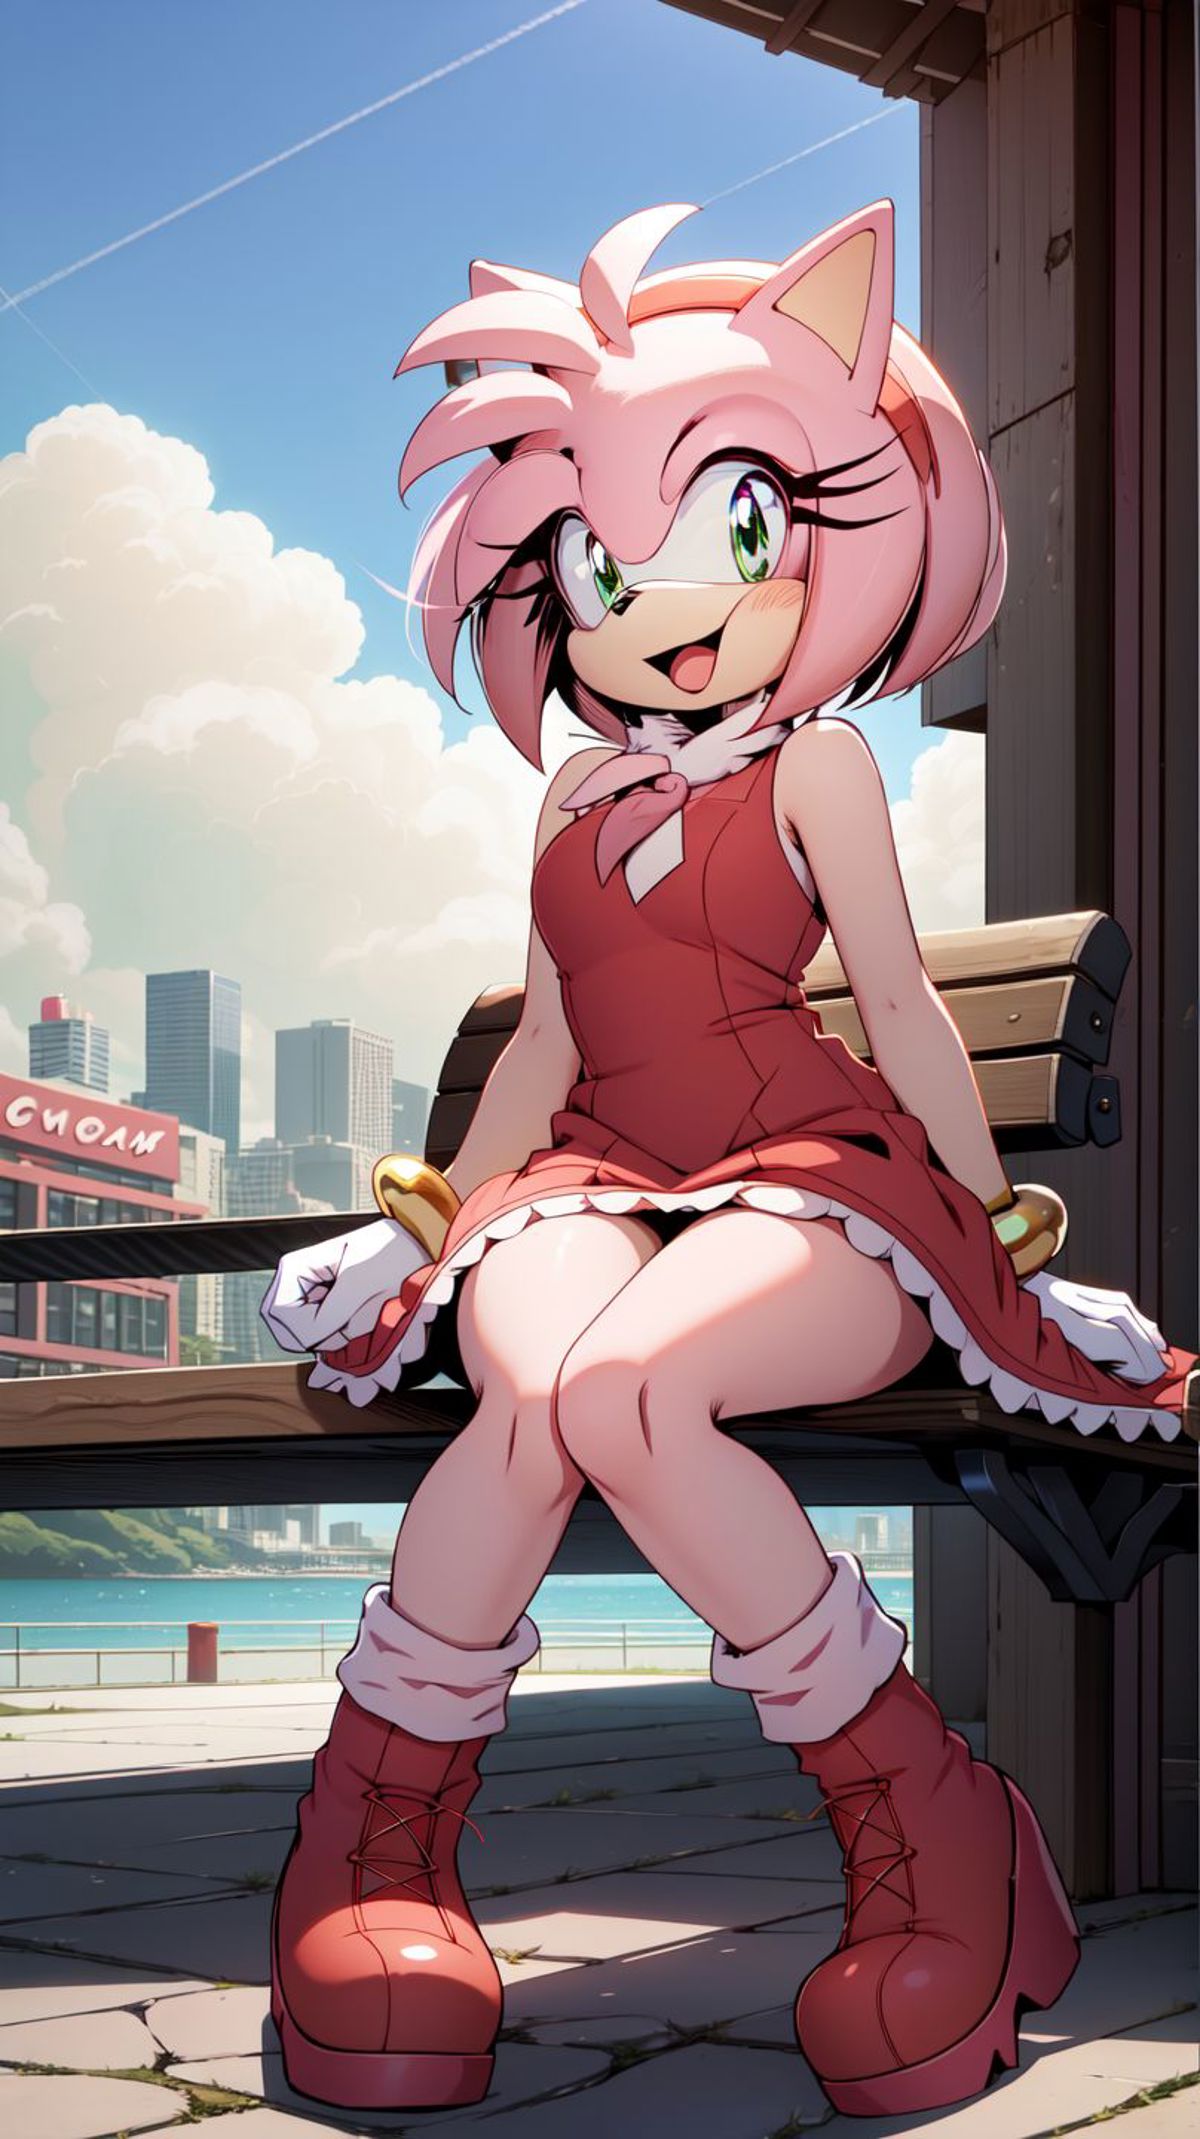 Amy Rose image by marusame